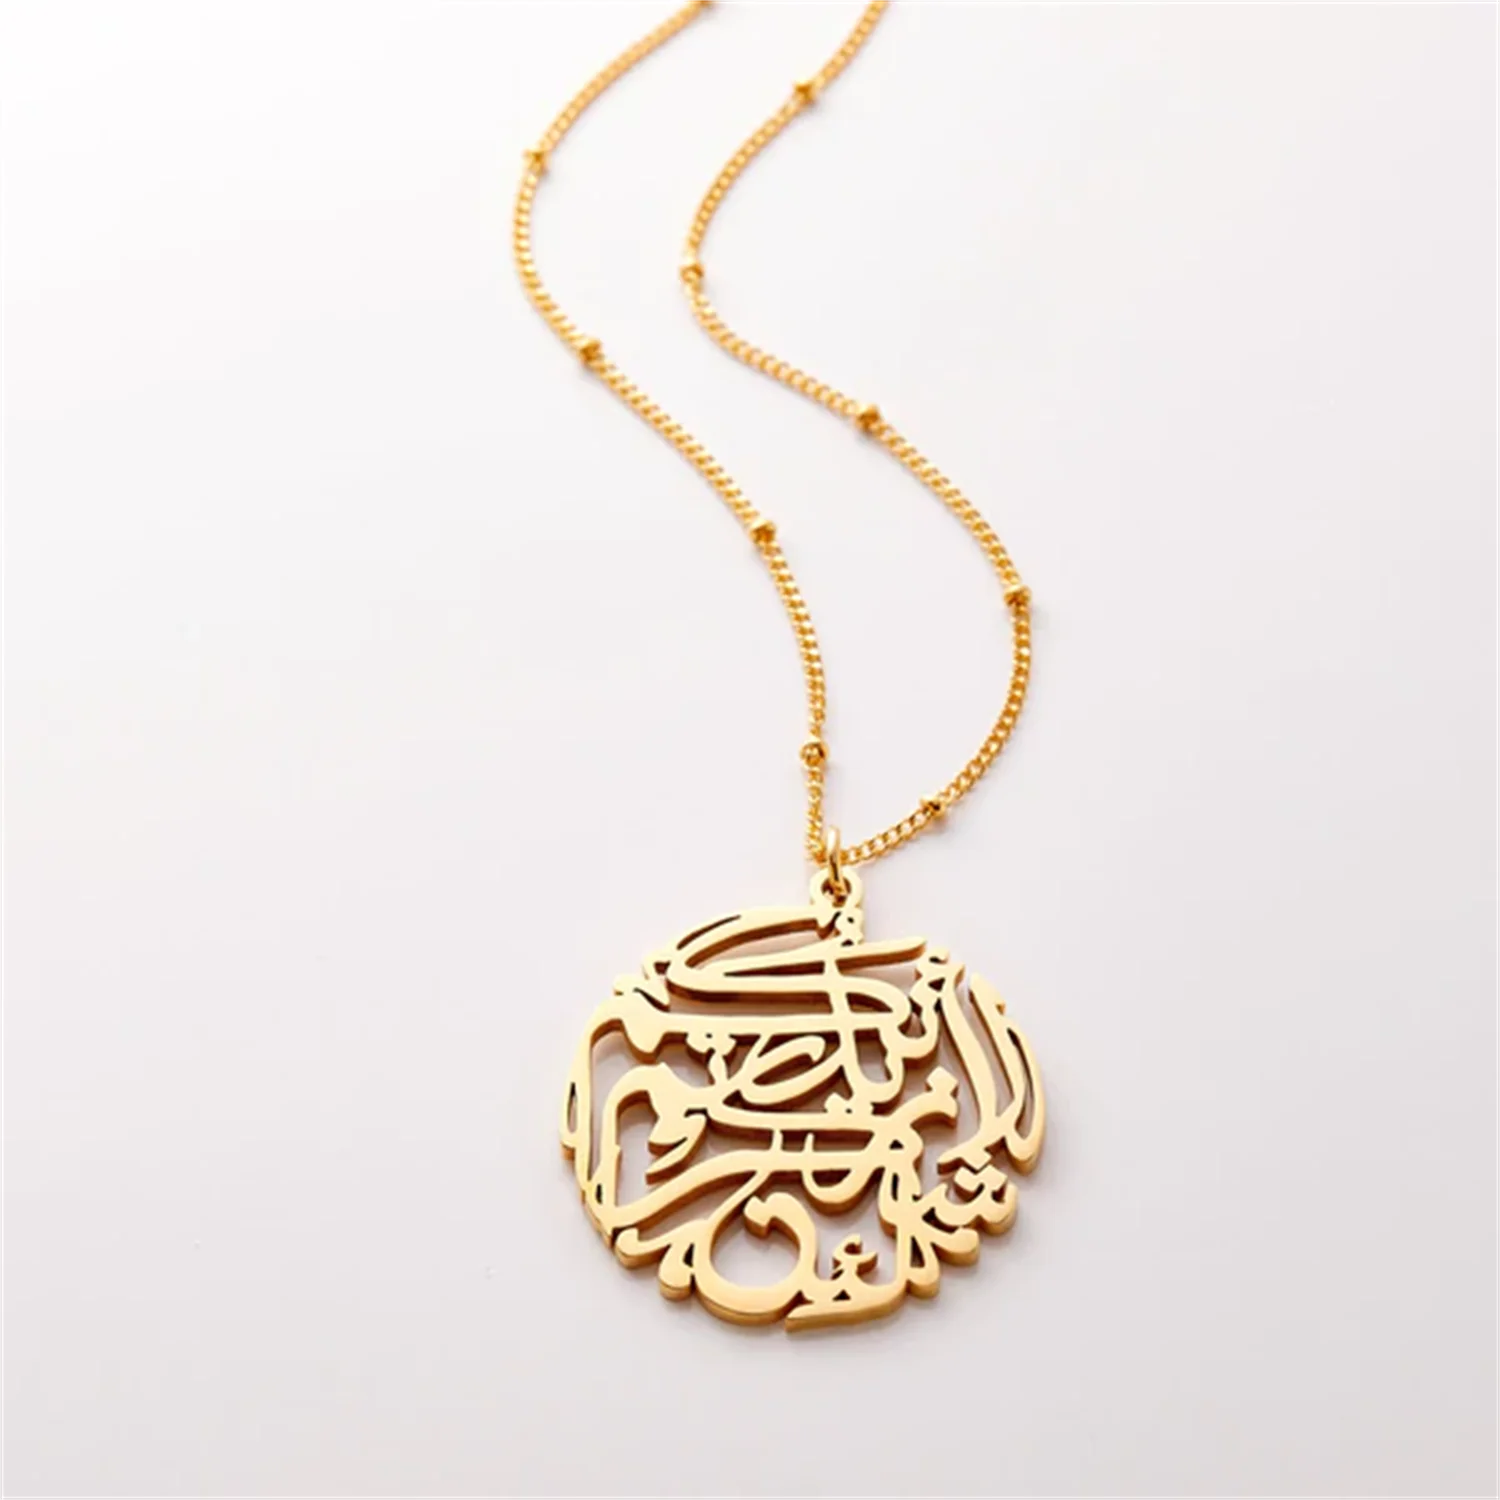 If you are grateful Necklace Islam Pendant Necklaces Stainless Steel Arabic Muslim Religious Jewlery Ramadan